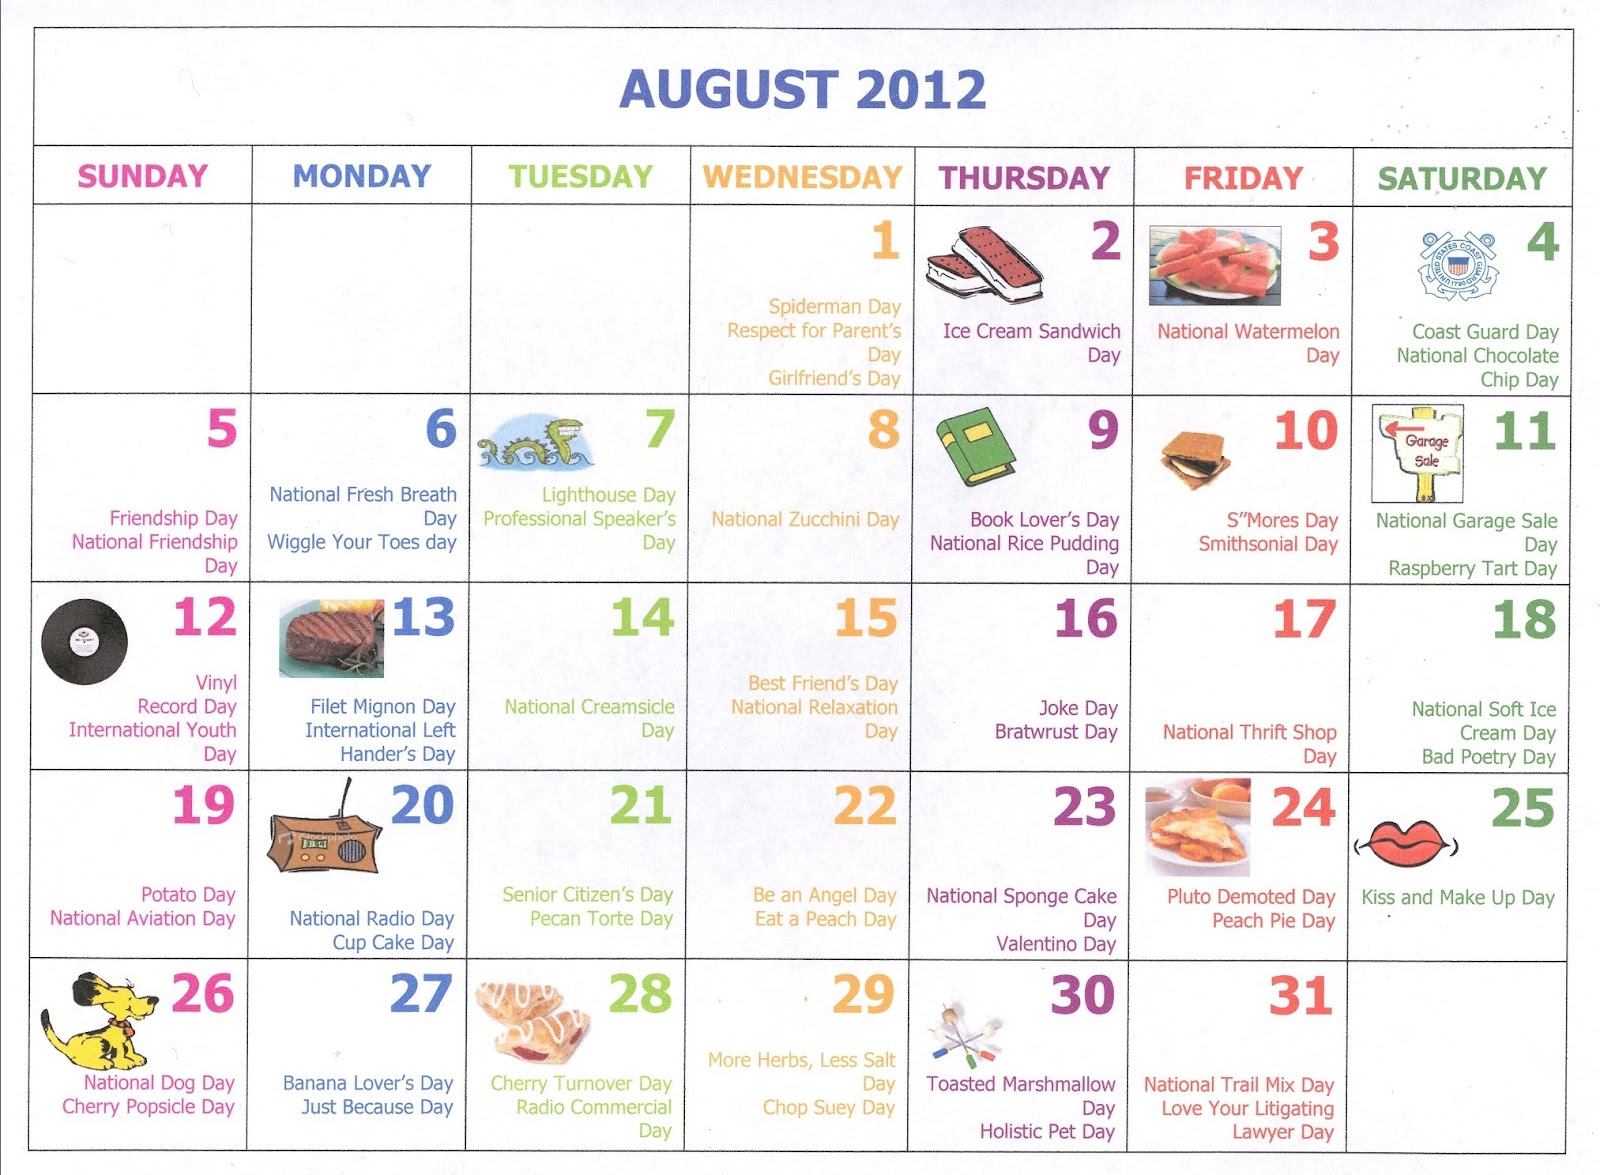 muse-services-august-silly-holiday-calendar